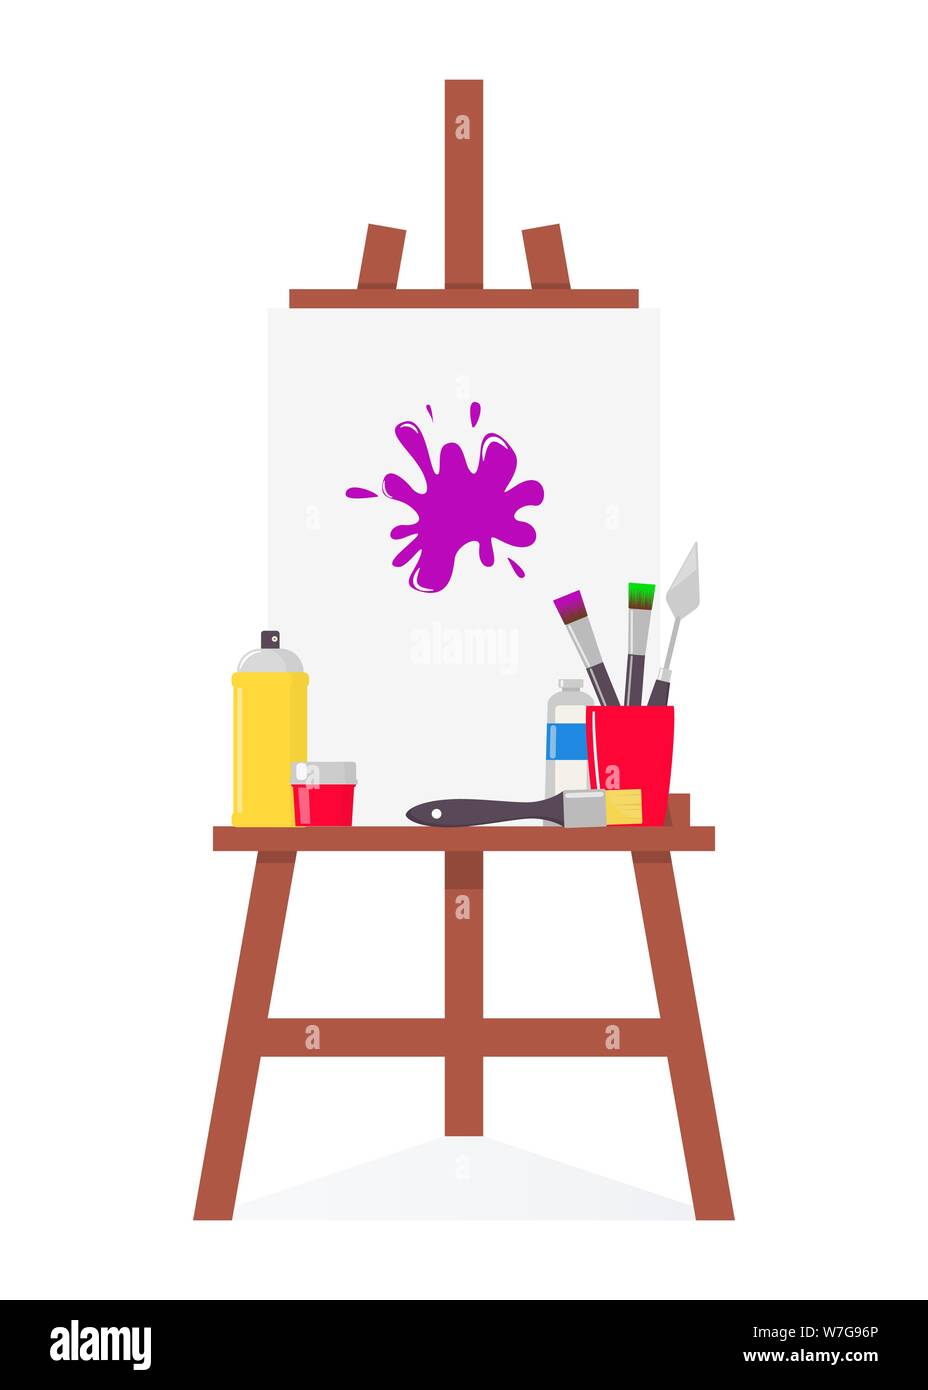 Painting supplies Vectors & Illustrations for Free Download